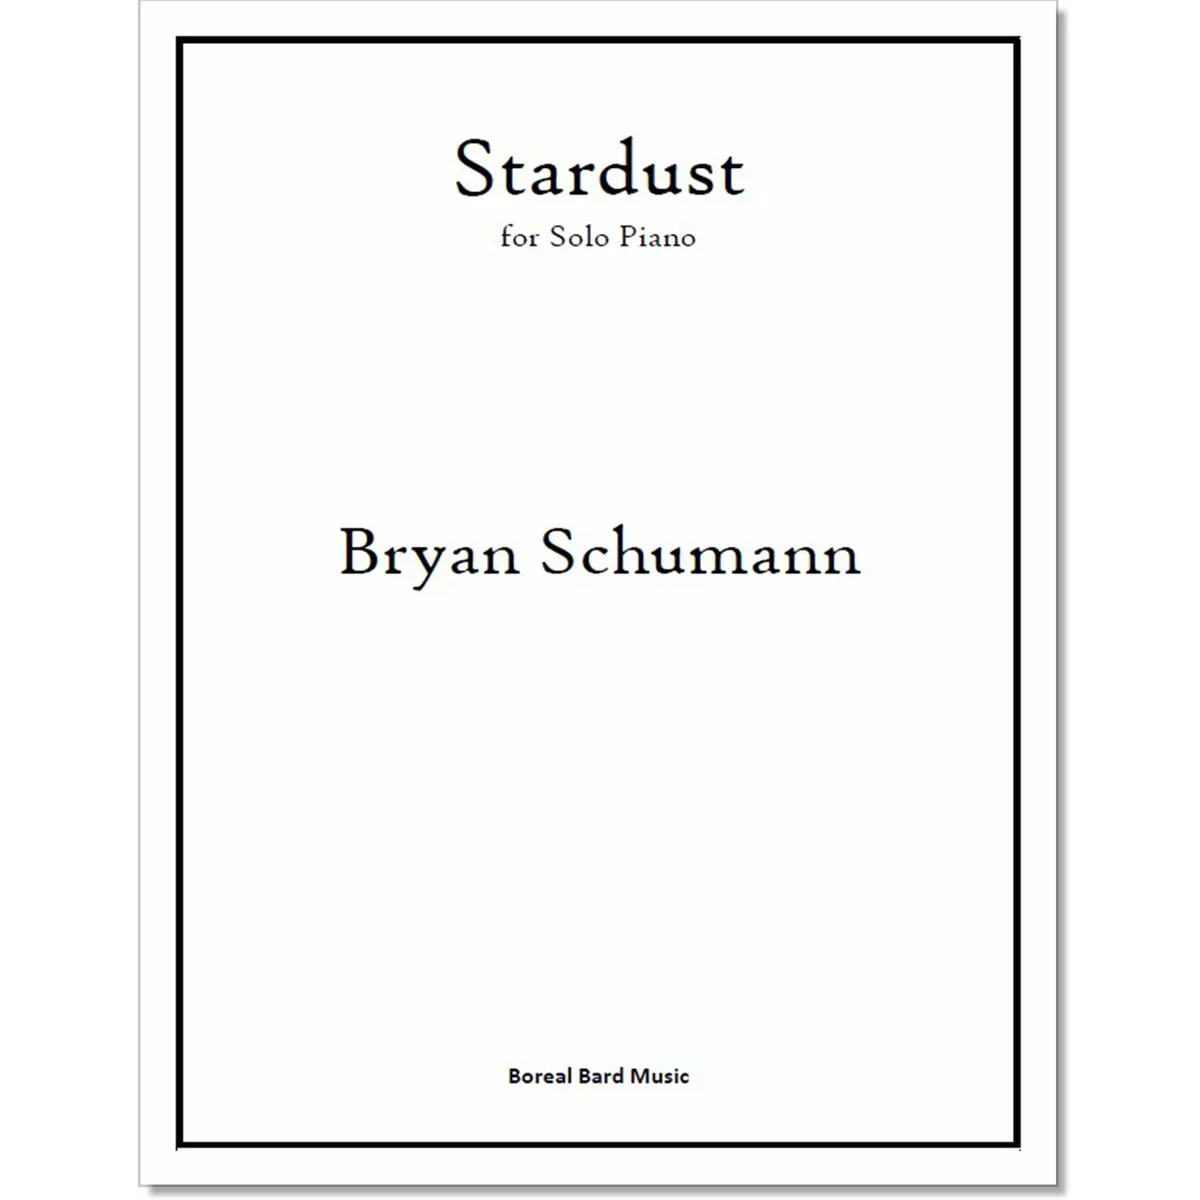 Stardust for Solo Piano (sheet music)